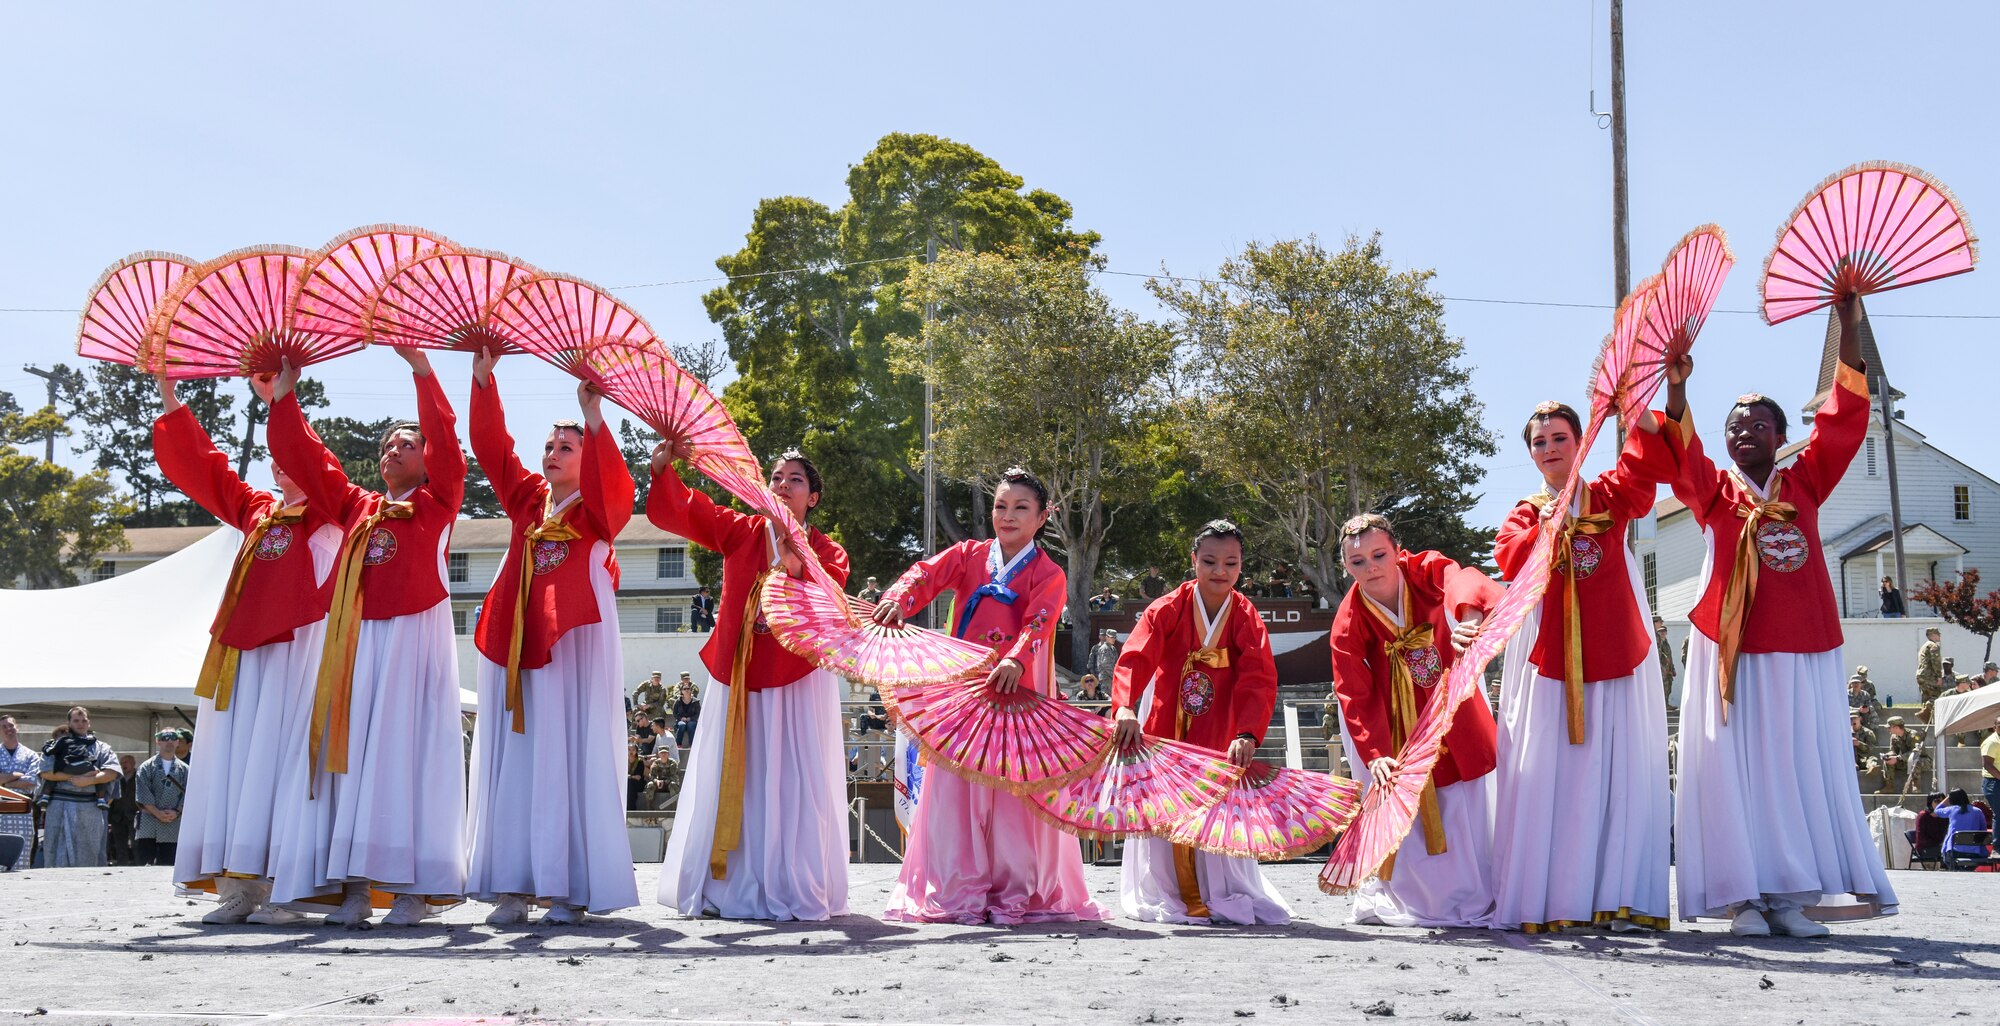 Students and faculty perform the Korean Fan Dance during the Defense Language Institute Foreign Language Center Language Day at the Presideo of Monterey, California, May 11, 2018. This was one of 48 performances that took place during Language Day that showcased various cultures and traditions throughout the world.